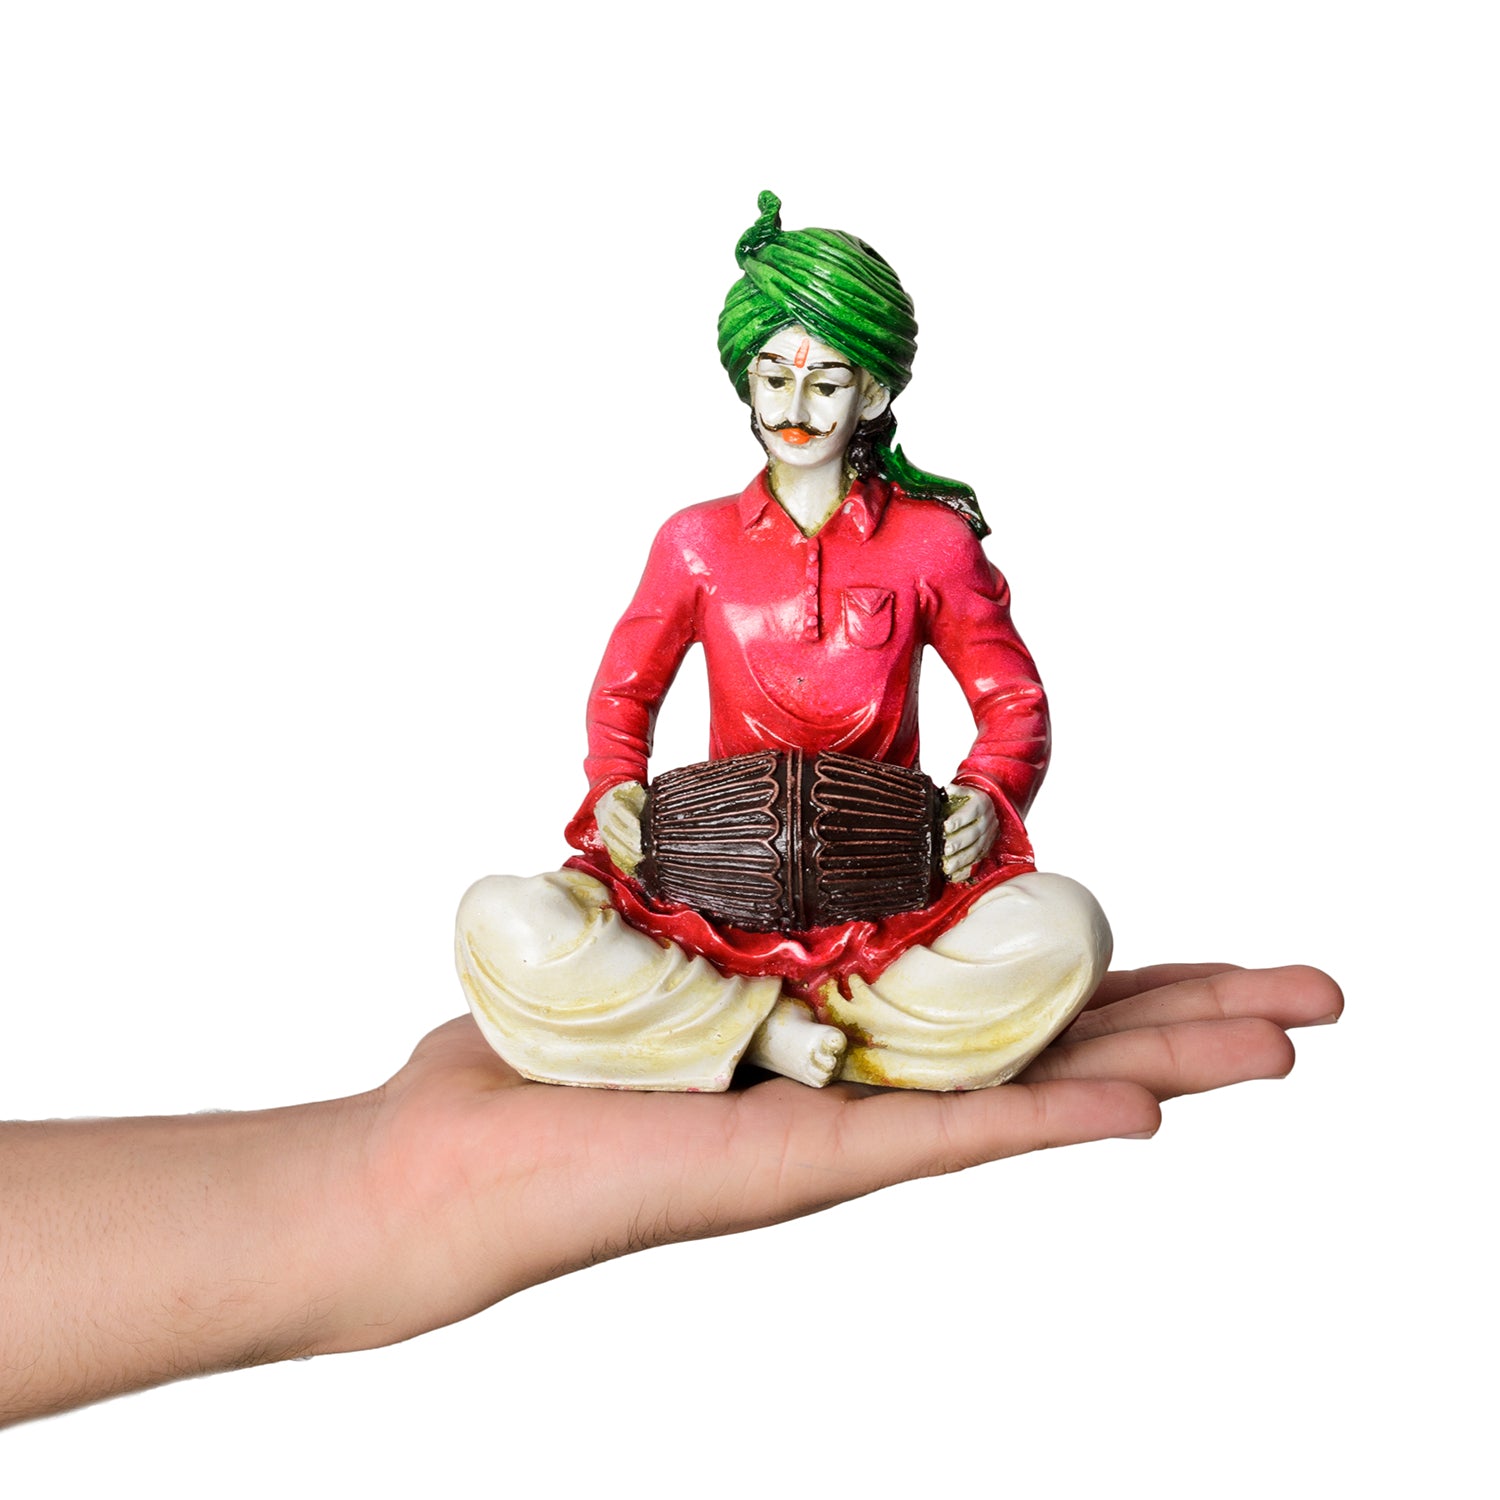 Polyresin Rajasthani Men Playing Dholak Handcrafted Decorative Showpiece (Pink and Green) 5